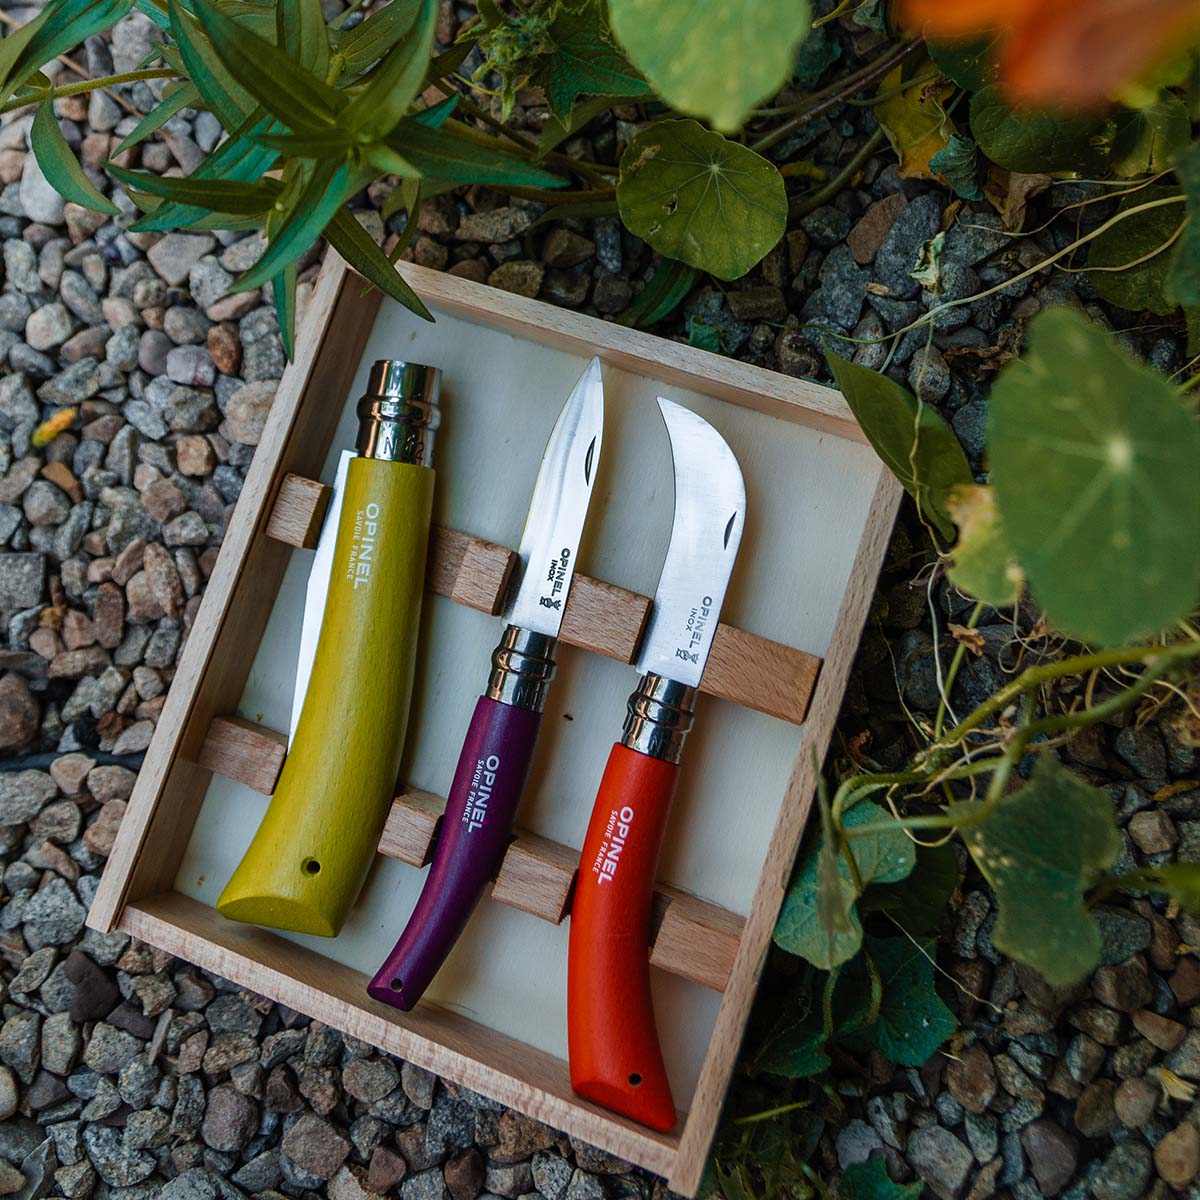 Opinel 4-Piece Essentials Small Kitchen Knives Set, Olive Wood